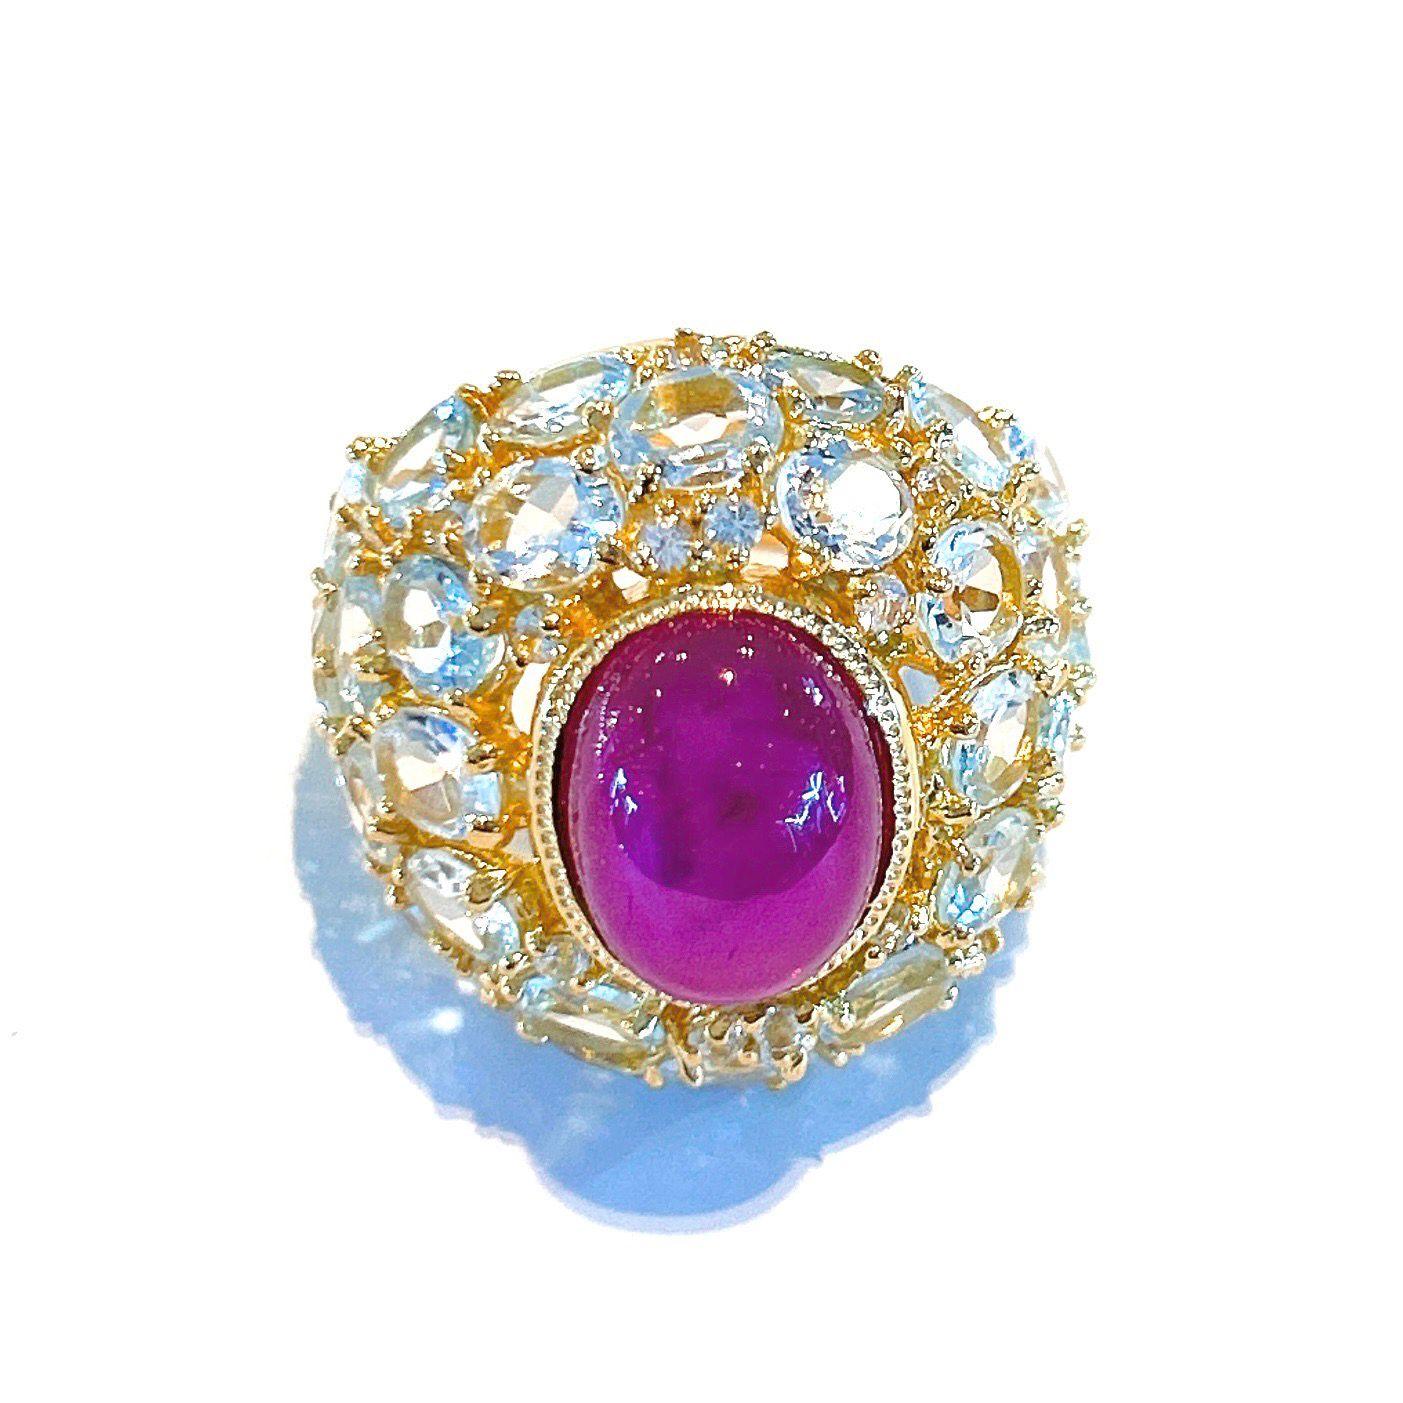 Bochic “Capri” Cocktail Ring 
Natural Beautiful Deep Red Ruby Cabochon - 9 carats
Natural Oval brilliant shape Blue Topaz - 22 carats 
Set in 22K Gold and Silver 950
This Ring is perfect to wear - Day to night, swim wear to evening wear.
Vintage